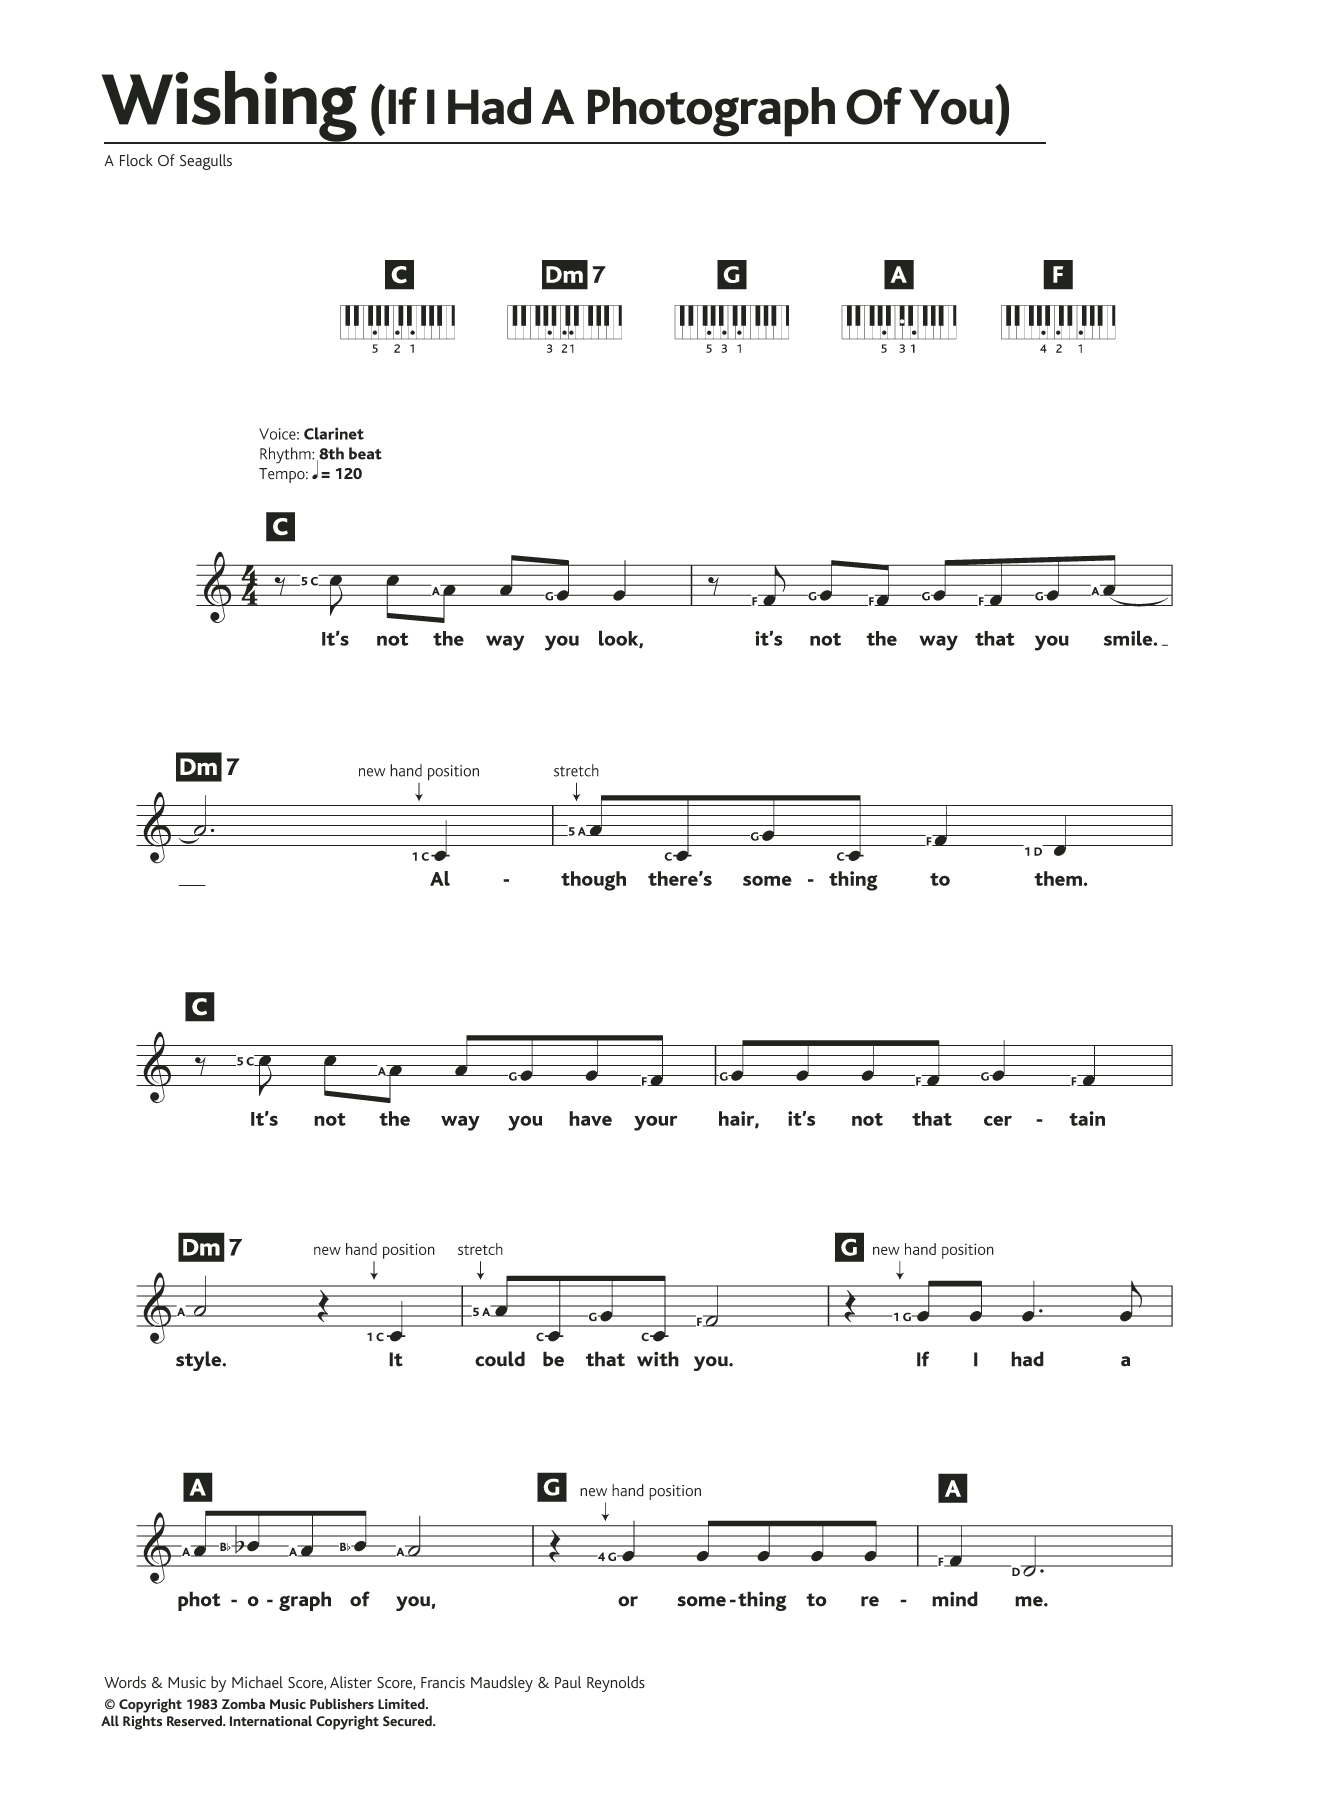 Download A Flock Of Seagulls Wishing (If I Had A Photograph Of You) Sheet Music